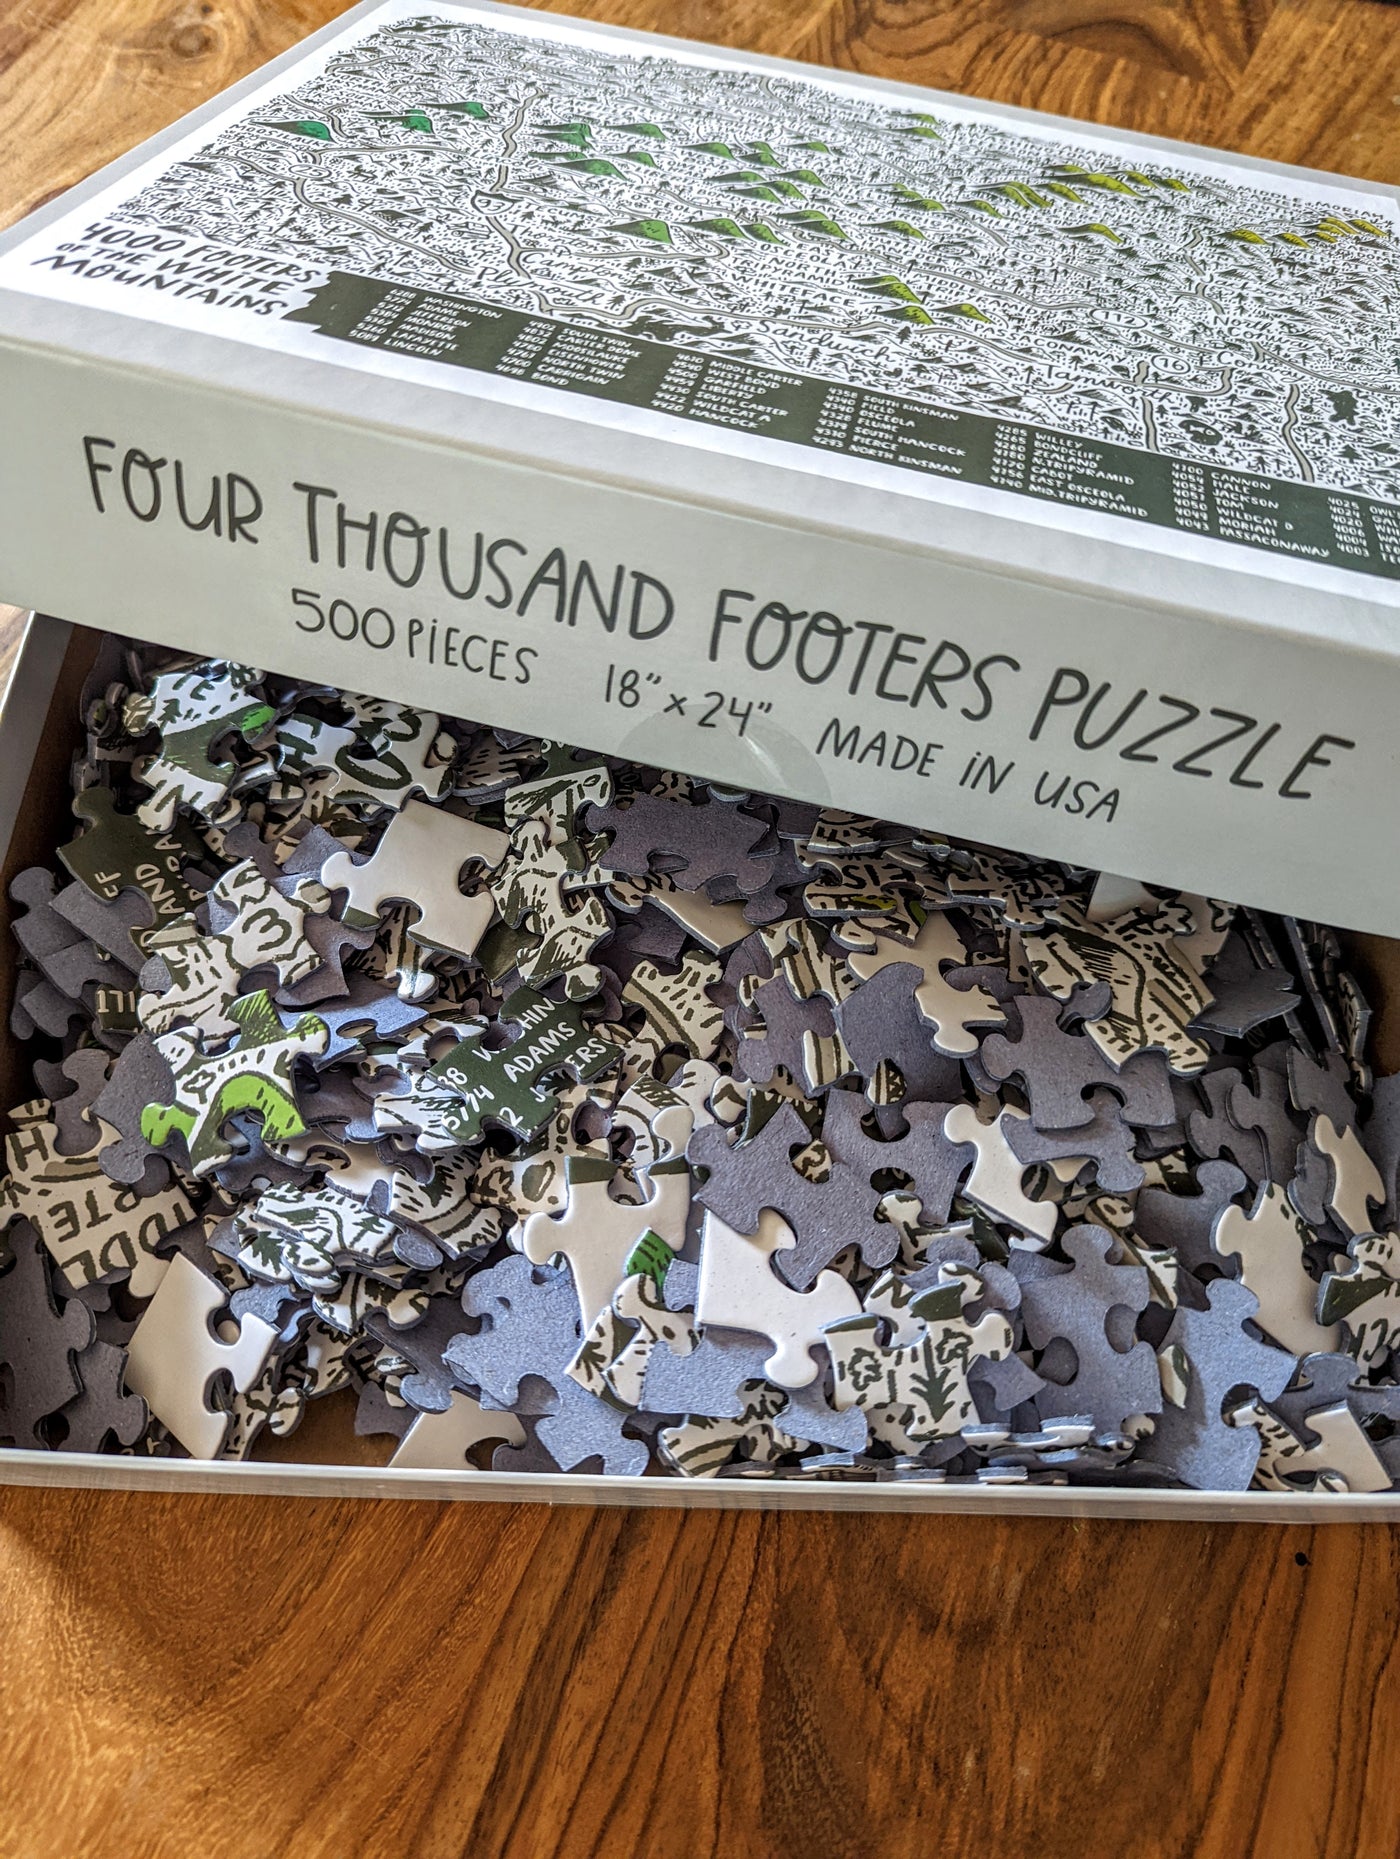 Four Thousand Footers Jigsaw Puzzle by Brainstorm